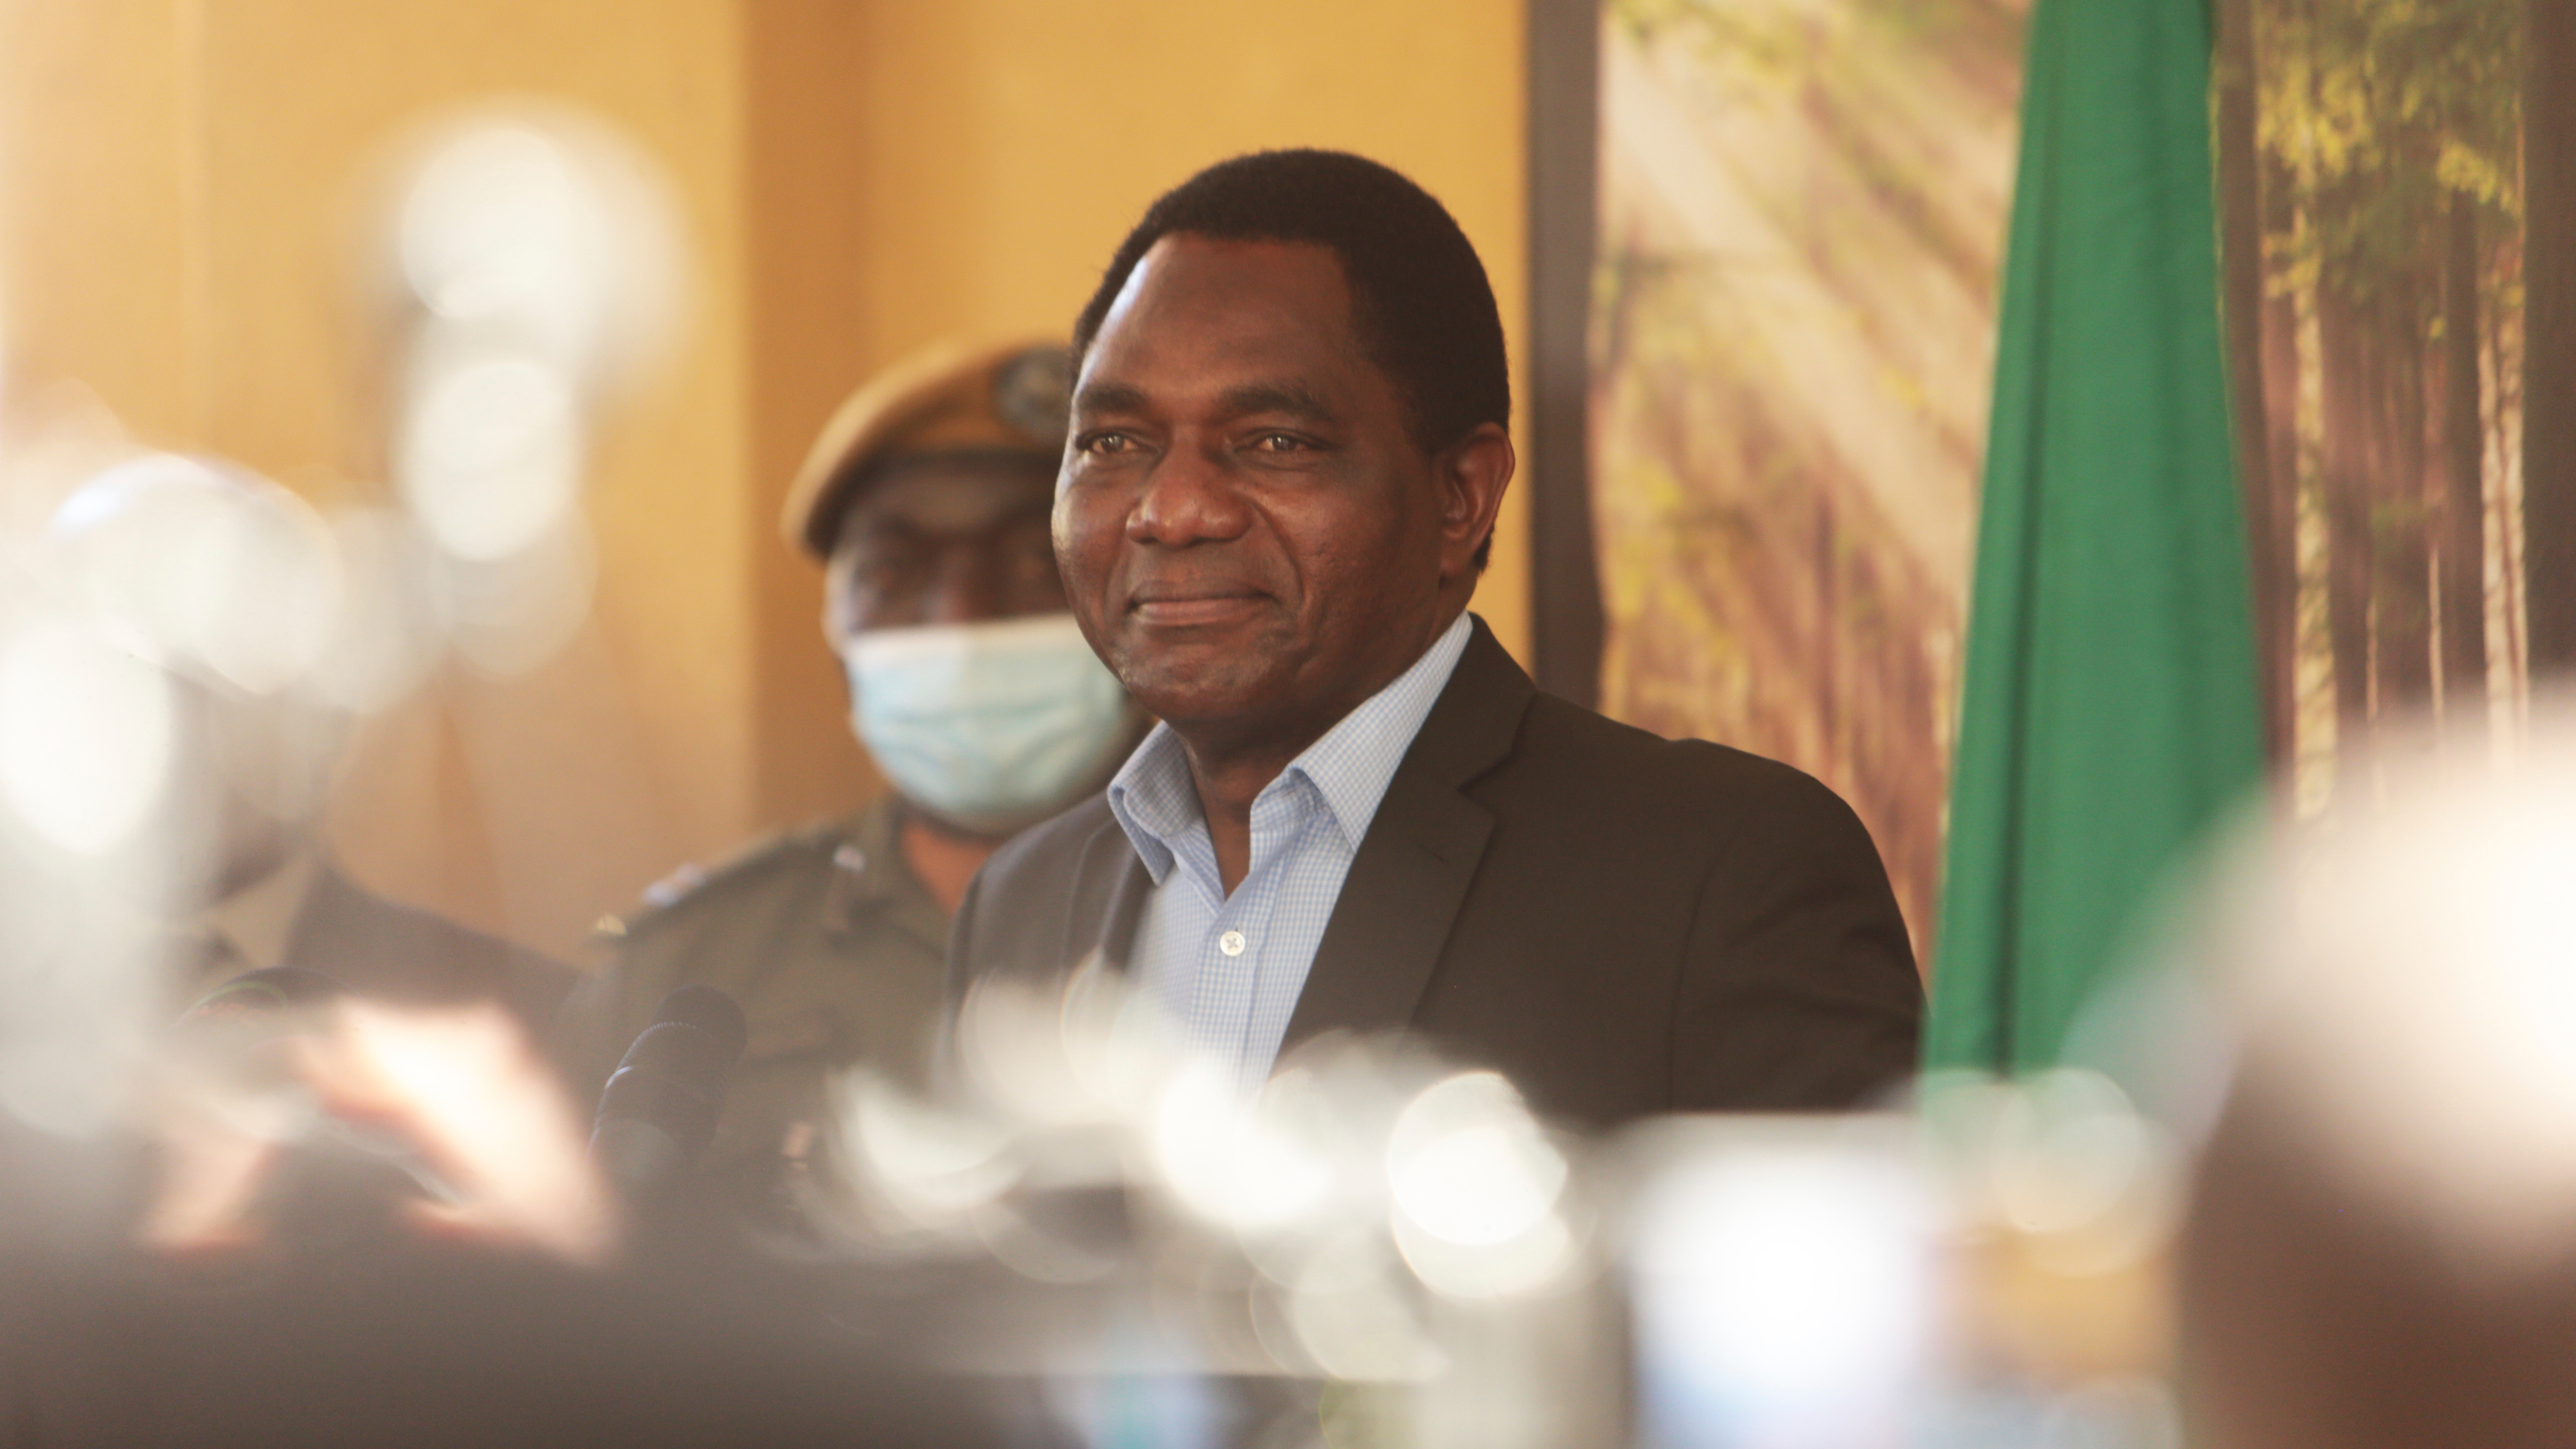 Zambian President Hakainde Hichilema addresses a press conference at his residence in Lusaka, Zambia, August 16, 2021. /AP